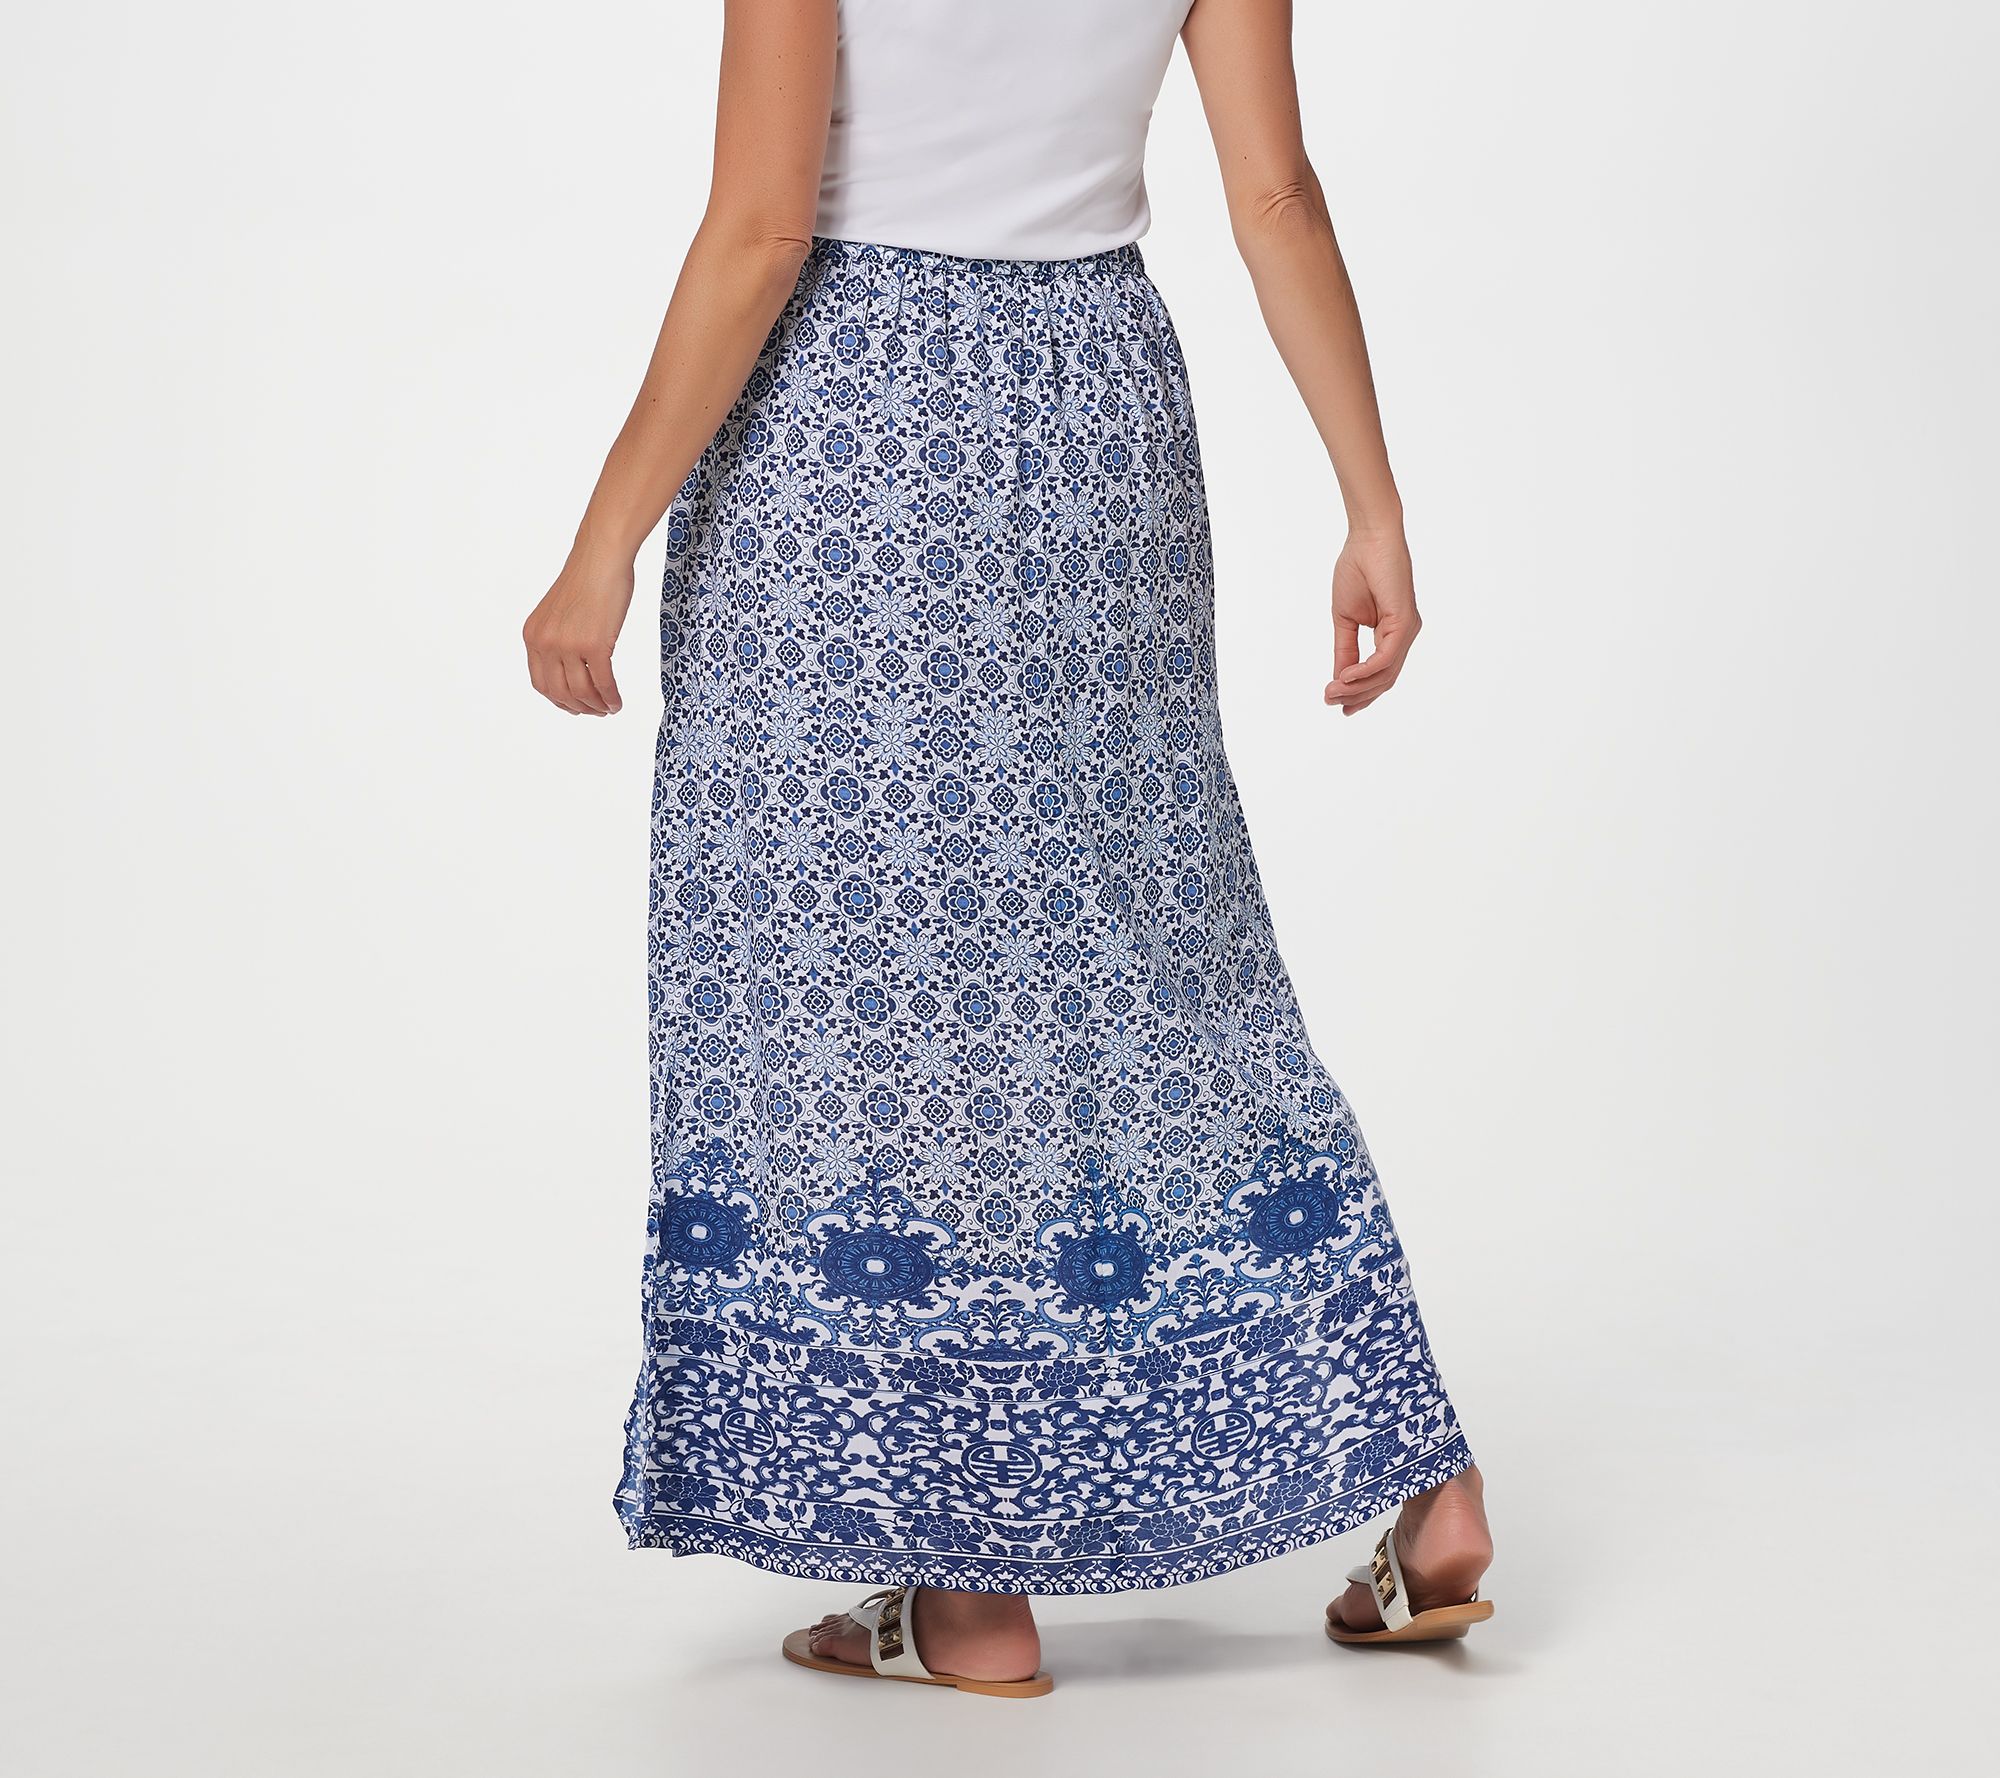 Tolani Collection Petite Printed Pull-On Woven Maxi Skirt - QVC.com